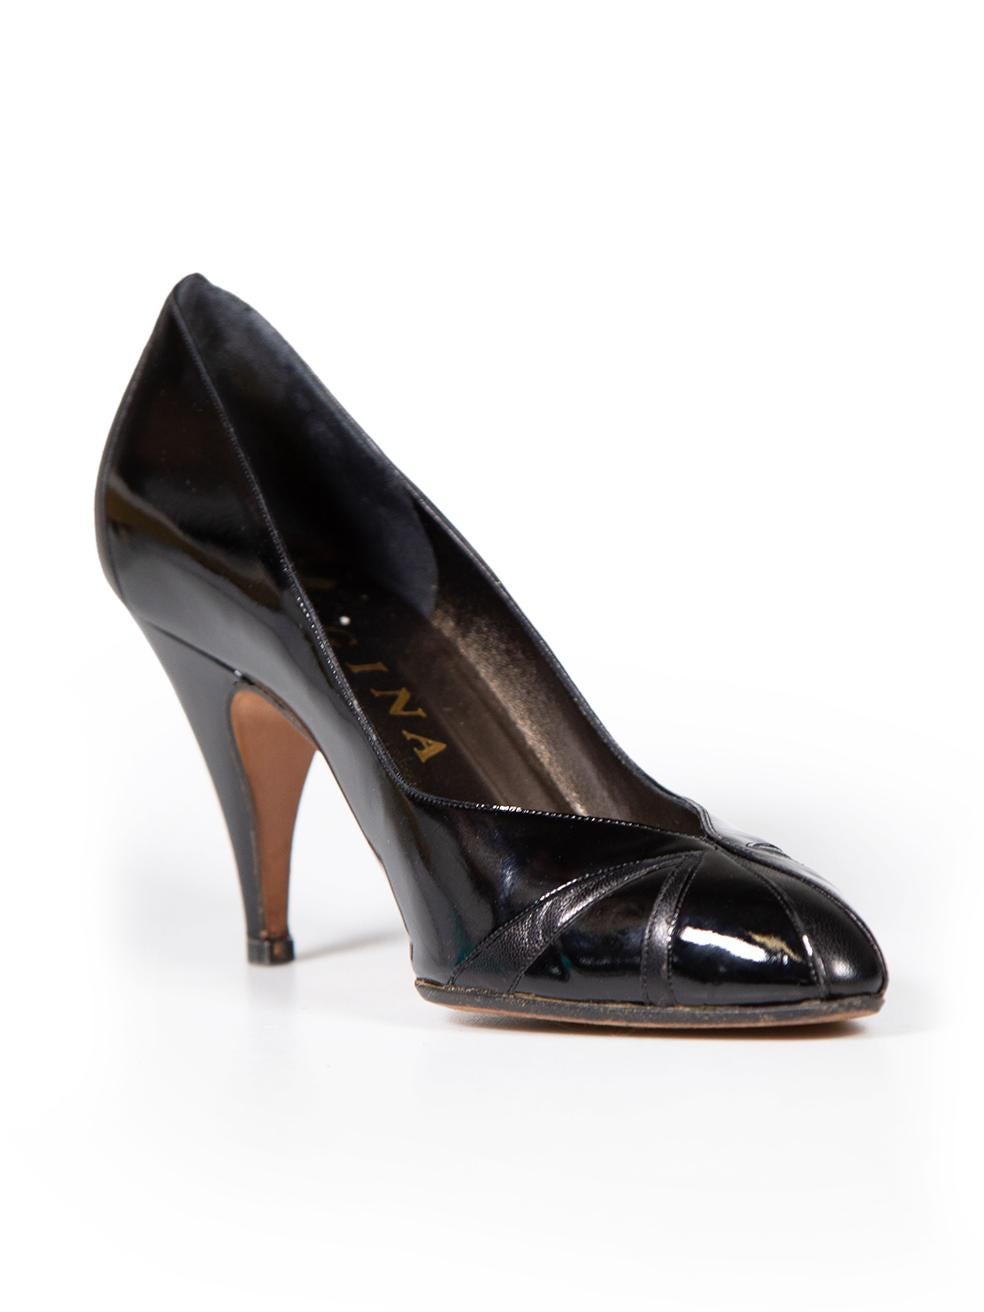 CONDITION is Very good. Minimal wear to shoes is evident. Minimal wear to the soles with abrasions on this used Gina designer resale item. These shoes come with original box.
 
 
 
 Details
 
 
 Black
 
 Patent leather
 
 Pumps
 
 Point toe
 
 Mid